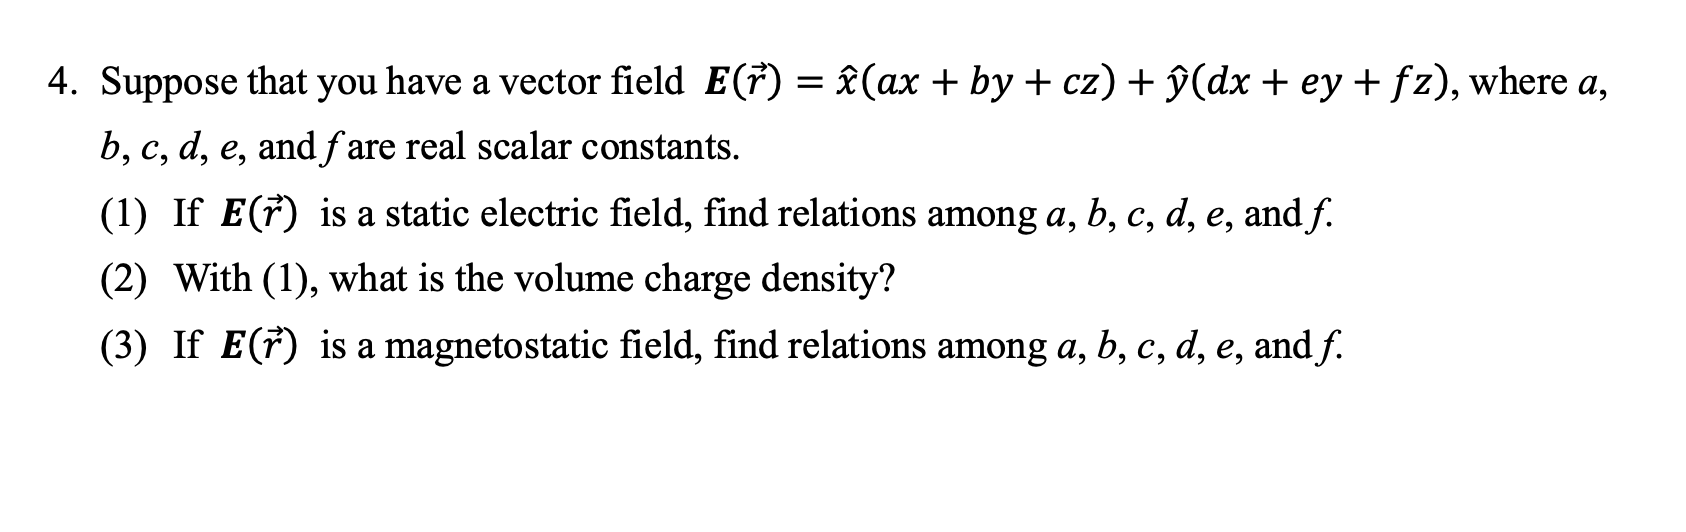 Suppose that you have a vector field E(ř) = î(ax + by + cz) + ŷ(dx + ey + fz), where a,
b, c, d, e, andf are real scalar constants.
(1) If E(†) is a static electric field, find relations among a, b, c, d, e, and f.
(2) With (1), what is the volume charge density?
(3) If E(†) is a magnetostatic field, find relations among a, b, c, d, e, and f.
